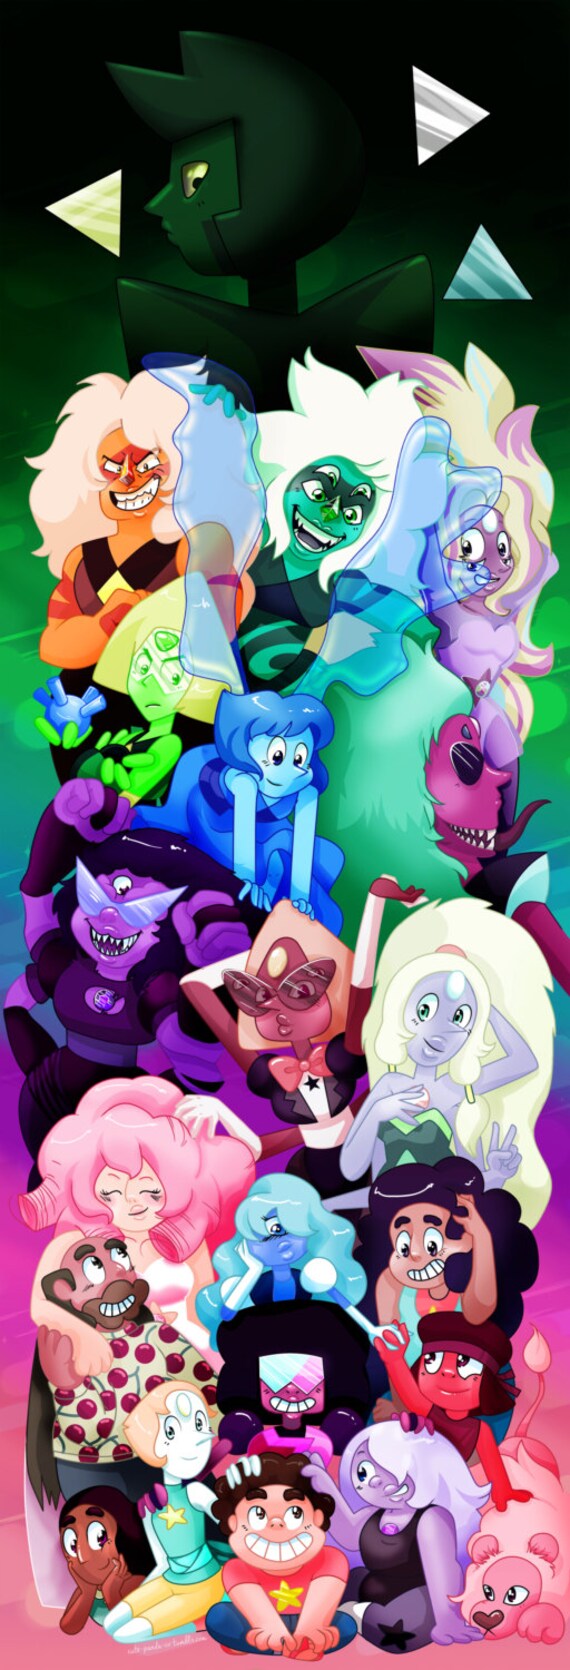 Steven Universe All Character Poster